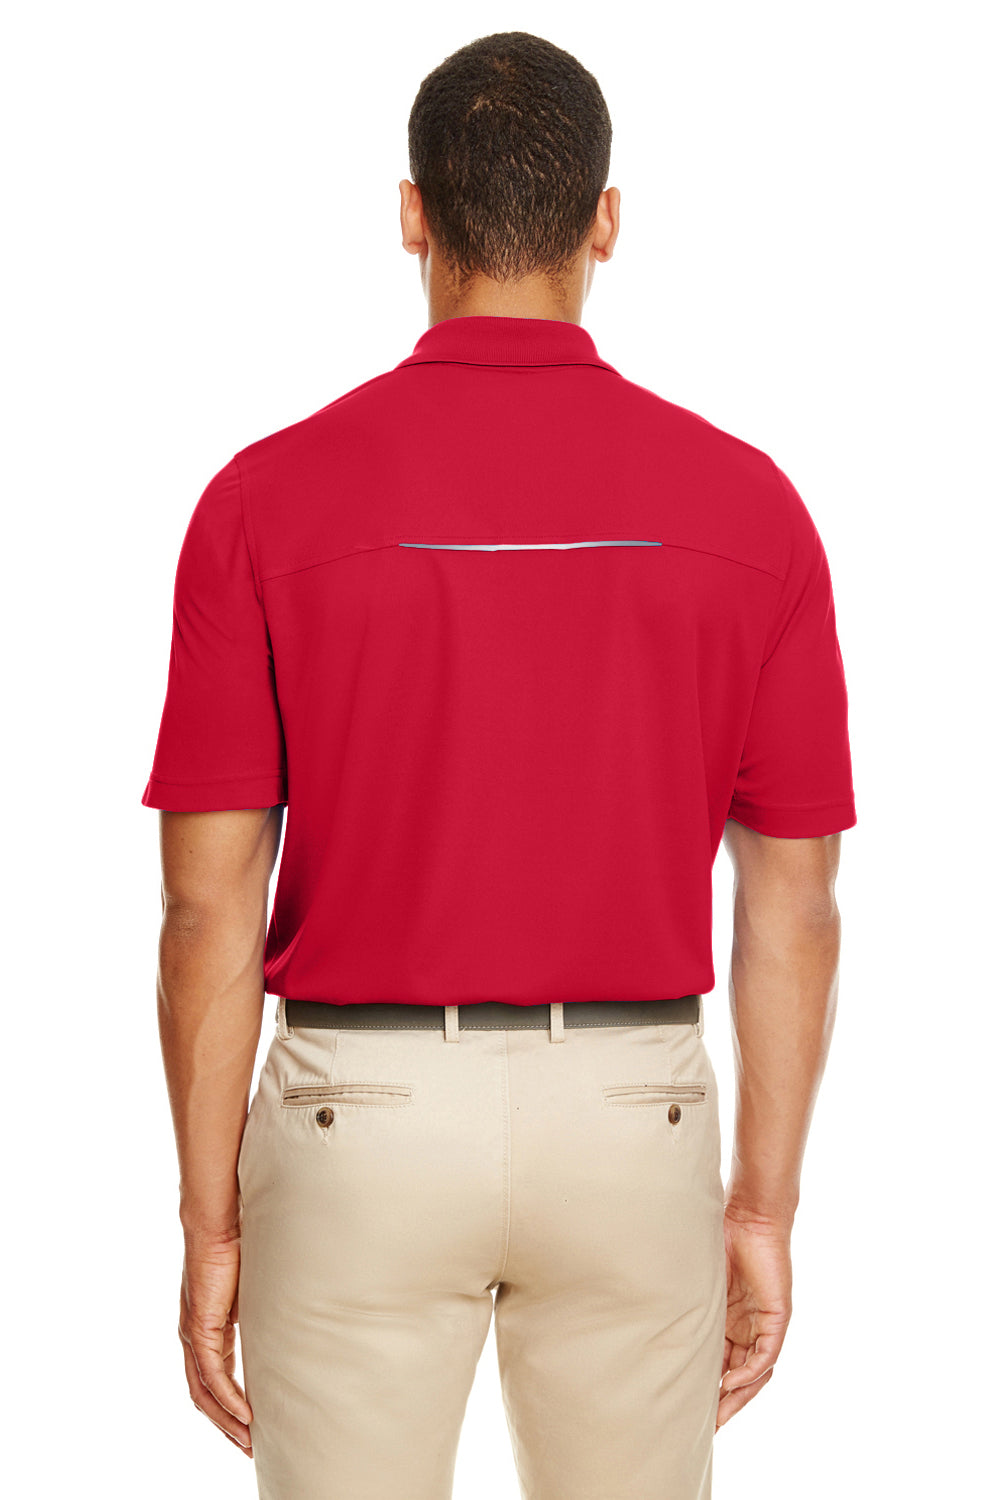 Core 365 88181R Mens Radiant Performance Moisture Wicking Short Sleeve Polo Shirt Red Back